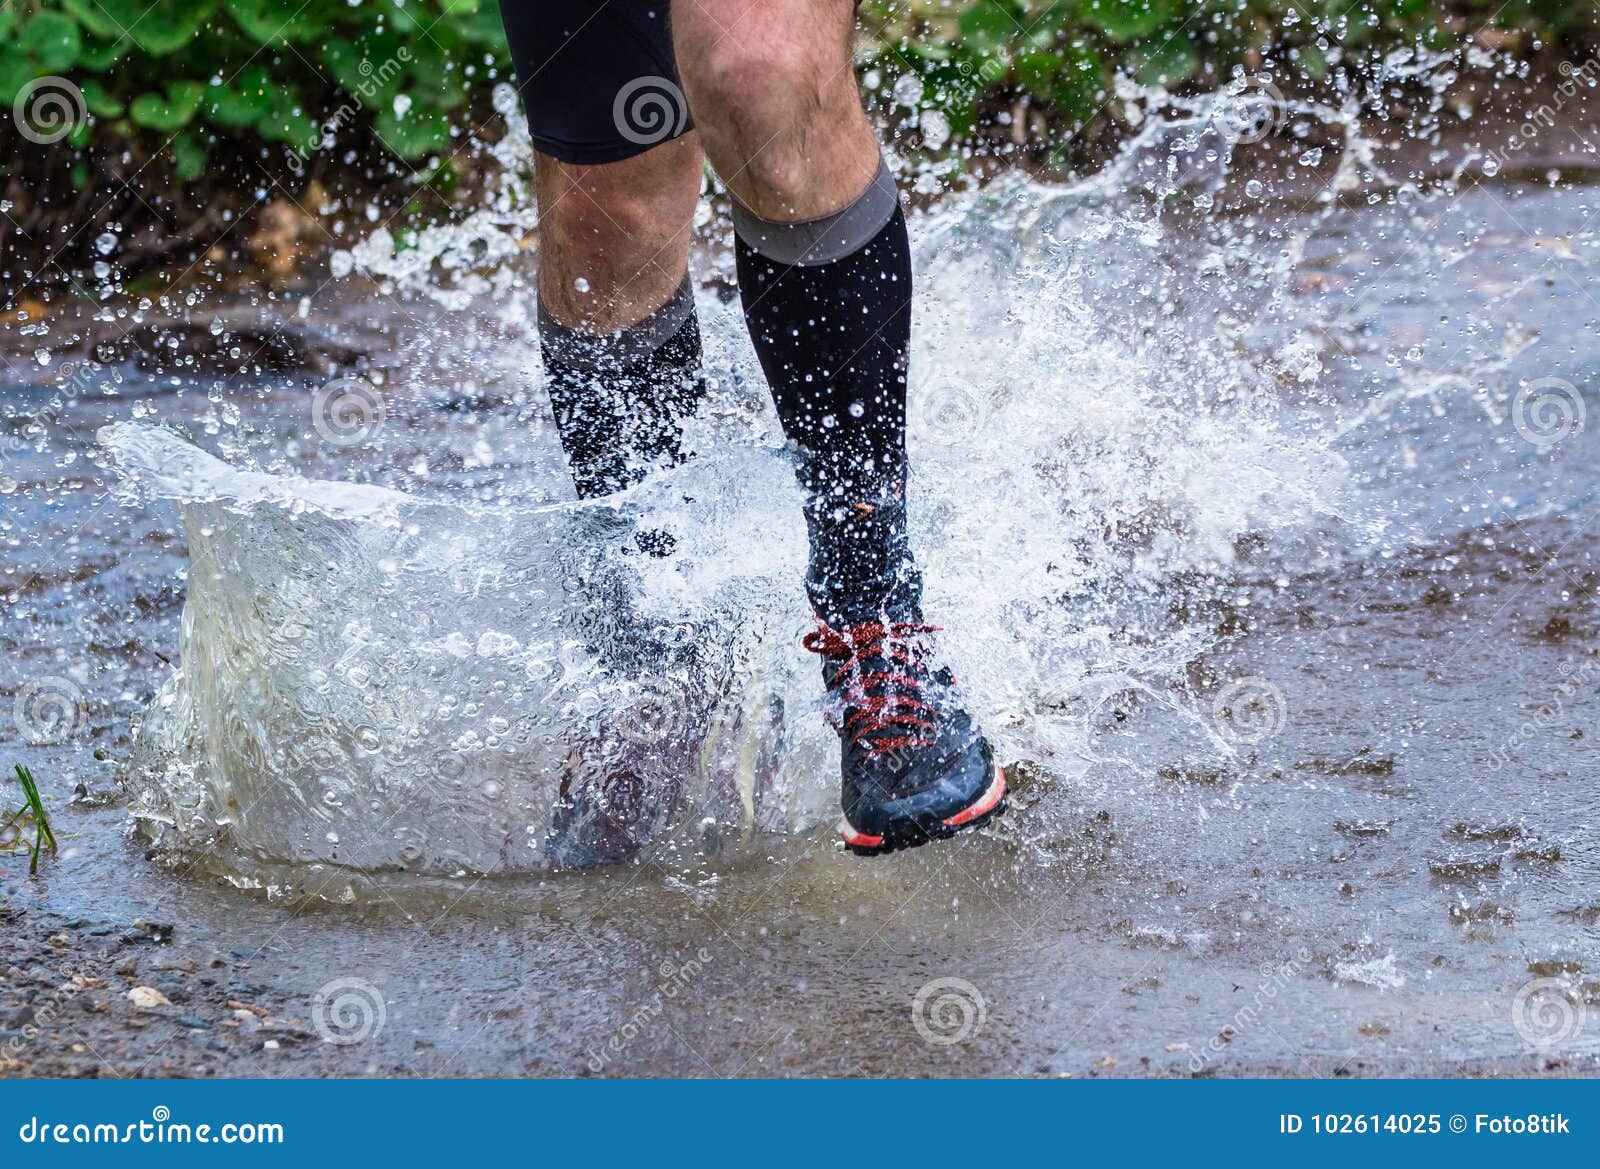 man trail running in the mountains, crossing a creek